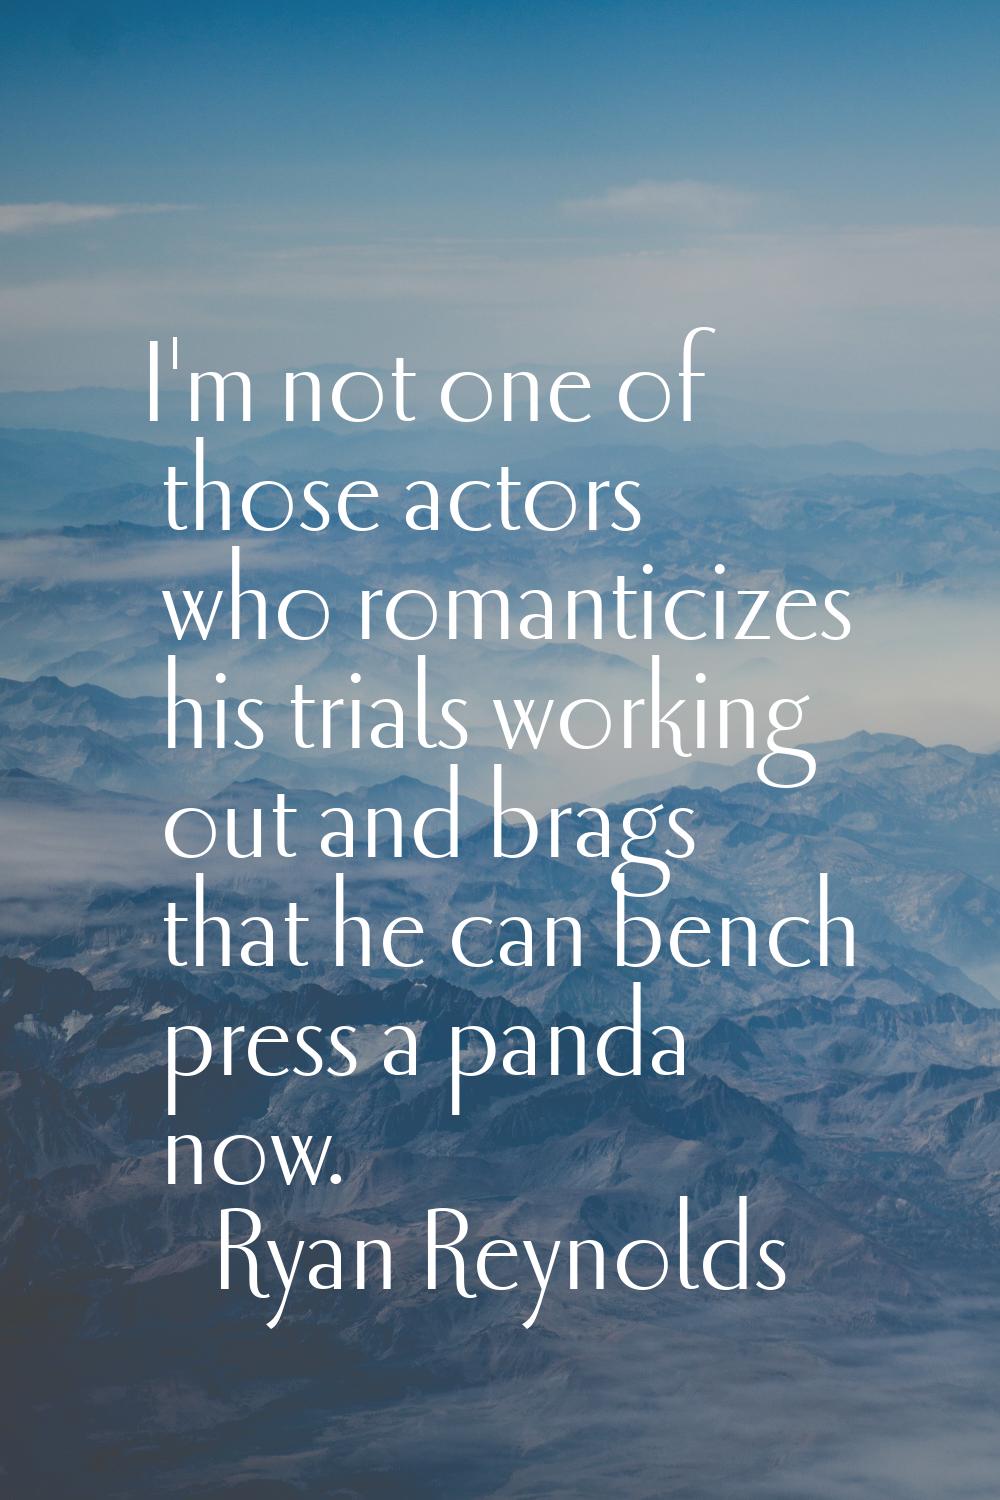 I'm not one of those actors who romanticizes his trials working out and brags that he can bench pre